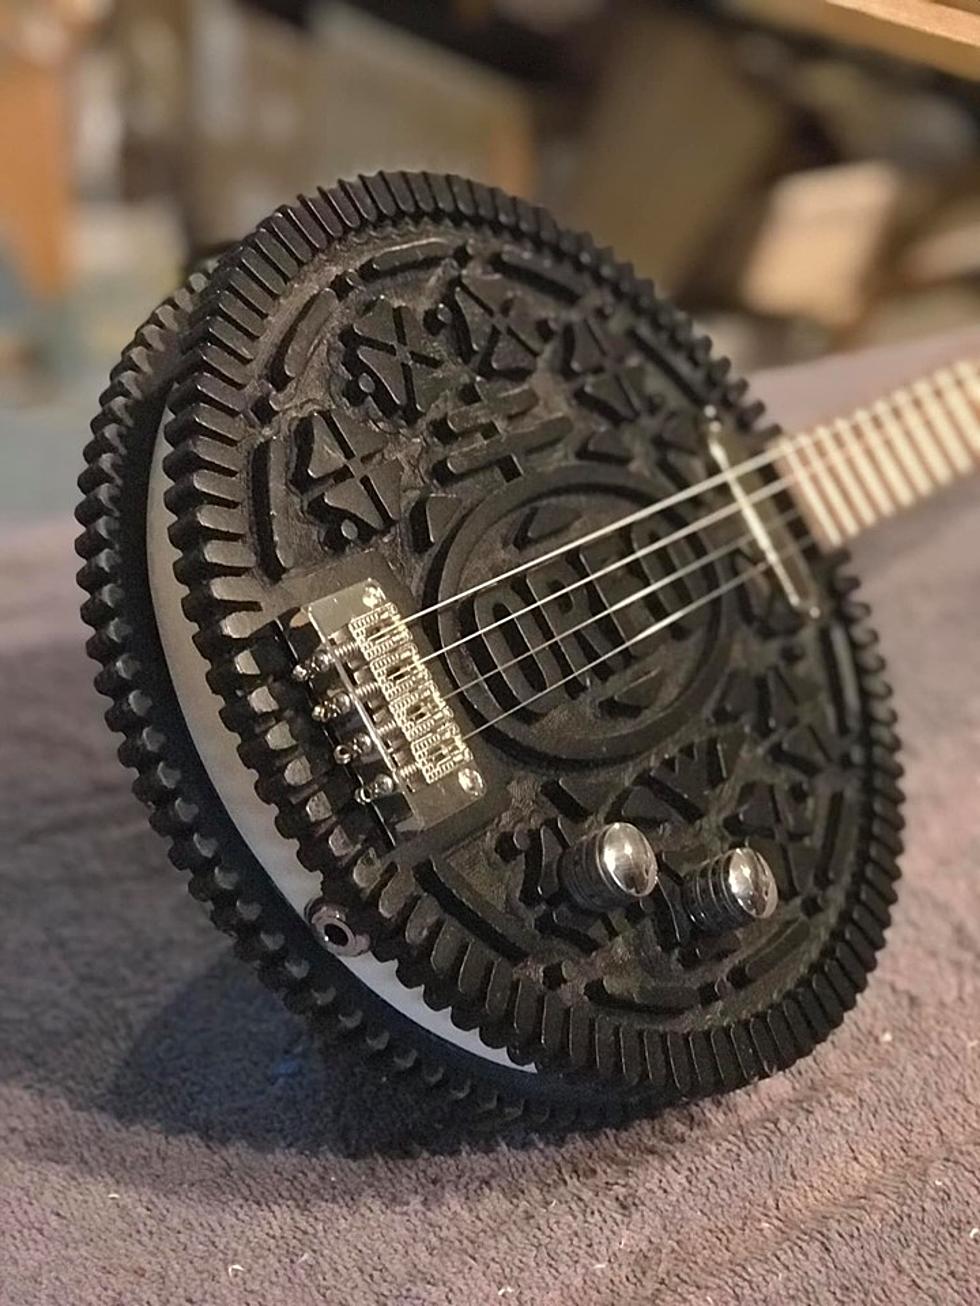 How About This For a Guitar?